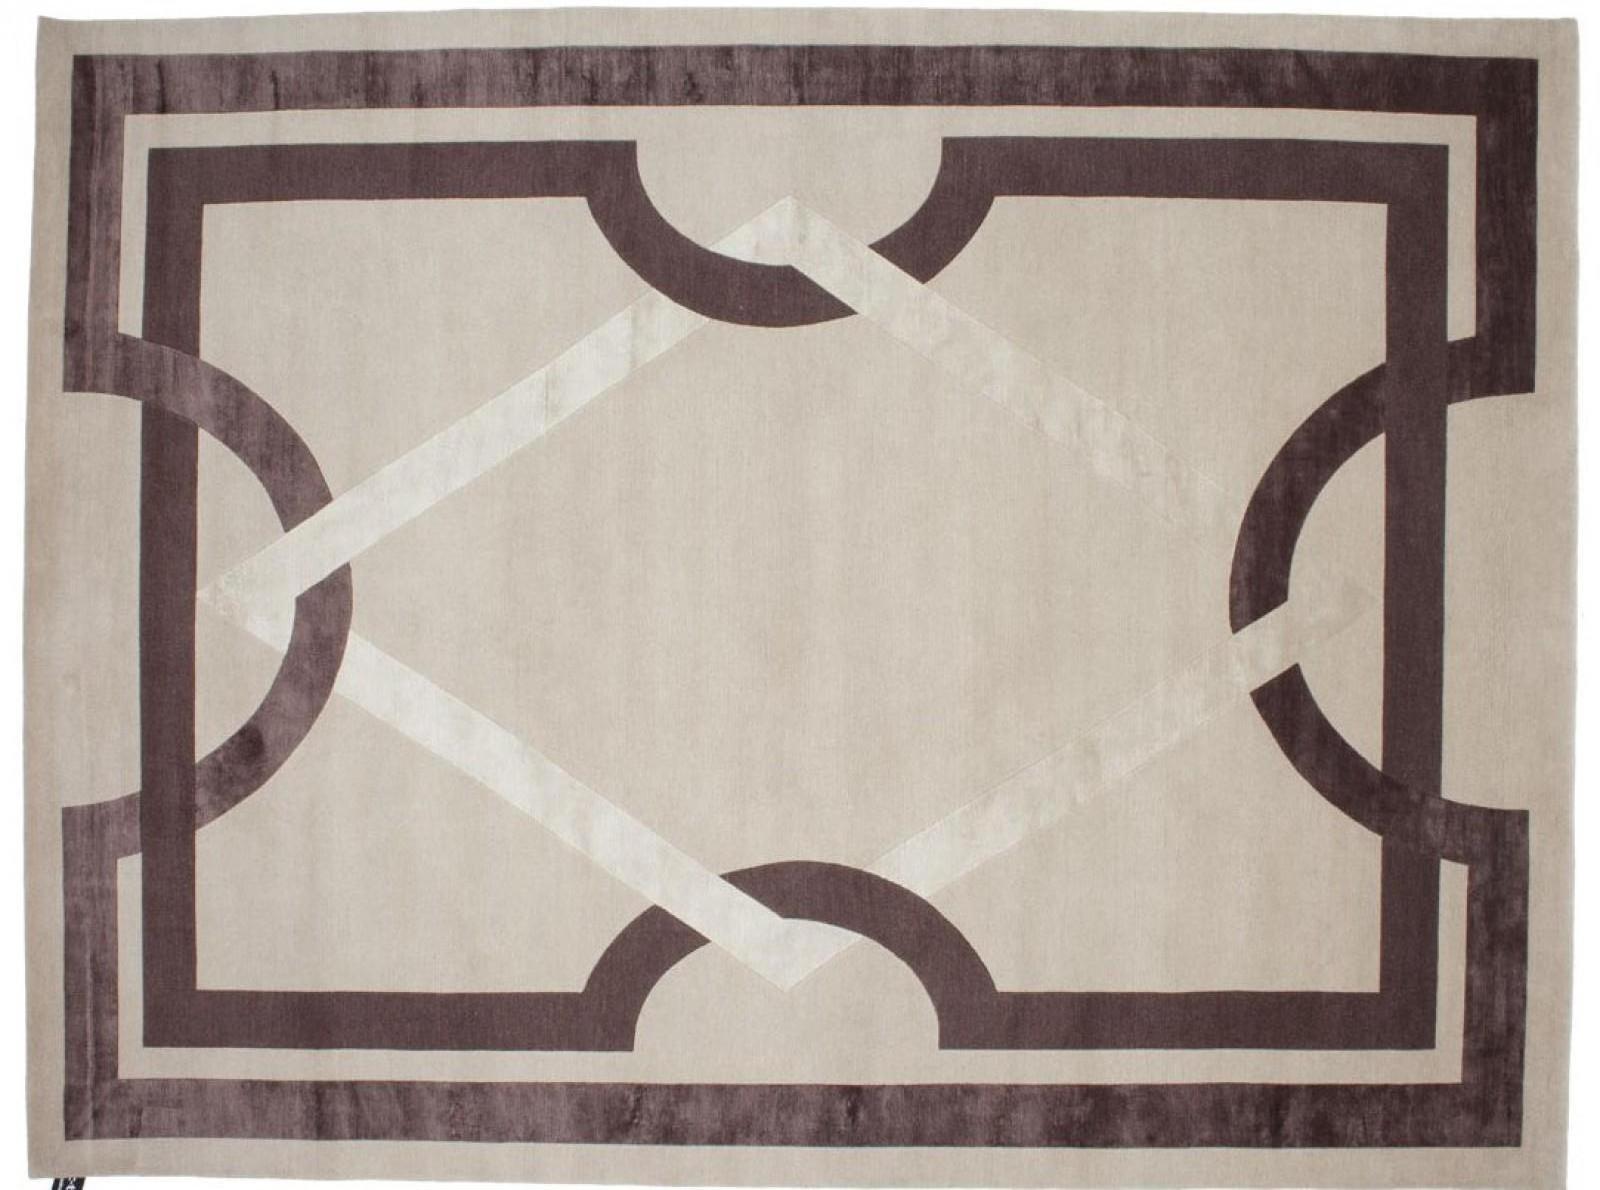 Fantastic hand-knotted carpet in Nepal with the Tibetan knot technique. The materials are hand-spun Himalayan wool and pure silk. The decoration is inspired by the French carpets of the early 20th century. The linearity of the design together with a